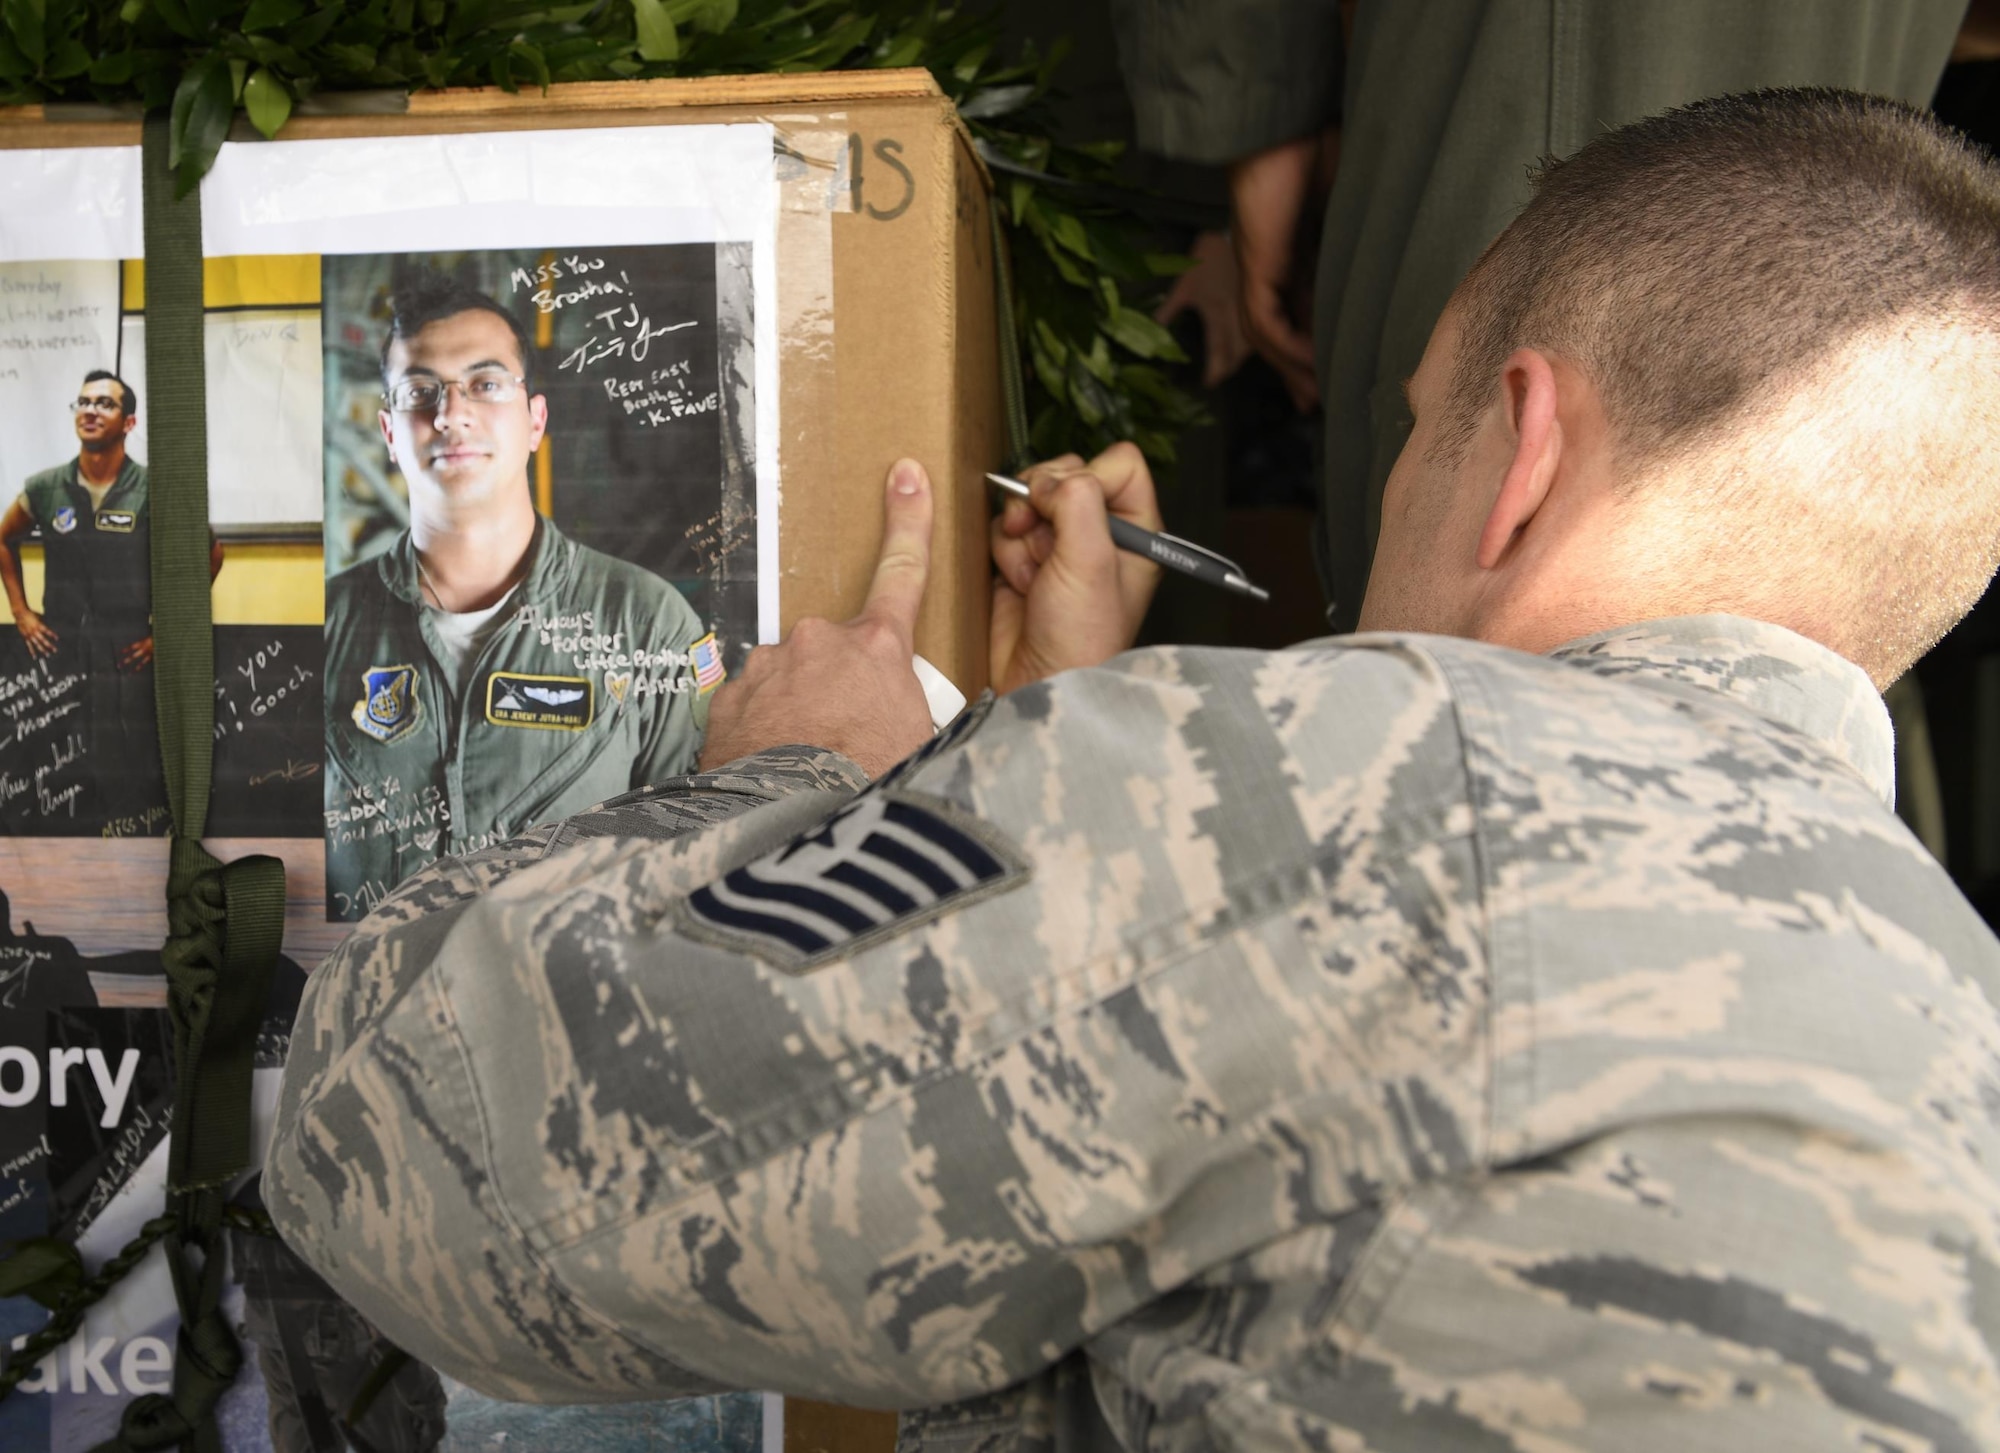 An Airman participating in Operation Christmas Drop signs the memorial aerial delivery bundle for Senior Airman Jeremy Jutba-Hake, 36th Airlift Squadron instructor loadmaster, at Andersen Air Force Base, Guam, Dec. 6, 2016. The 36 AS dropped Jutba-Hake’s memorial bundle, filled with donated supplies, on the Micronesian island of Satawal. After the drop, the island’s entire population of 600 stood on the beach to wave and thank the passing aircrew. (U.S. Air Force photo by Senior Airman Elizabeth Baker/Released)